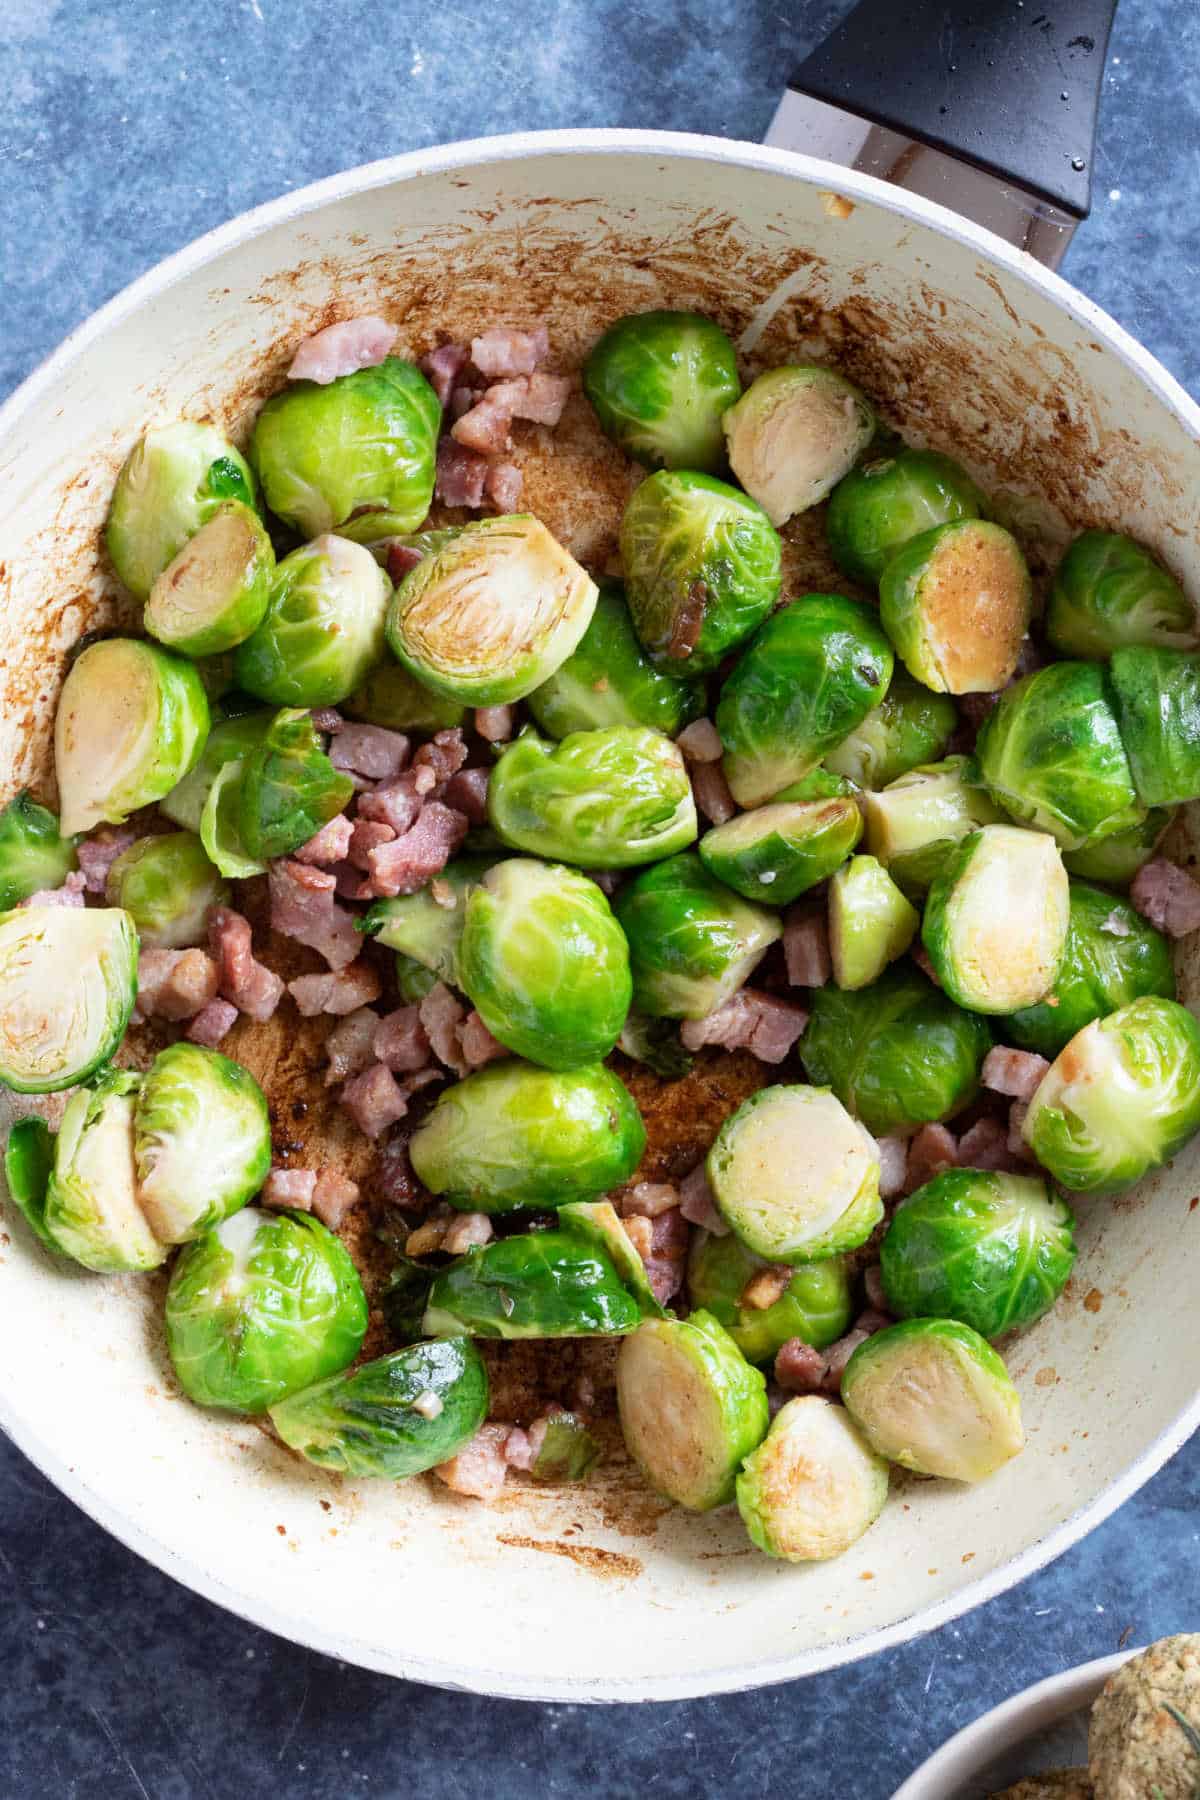 Pan fried brussels sprouts with crispy bacon.